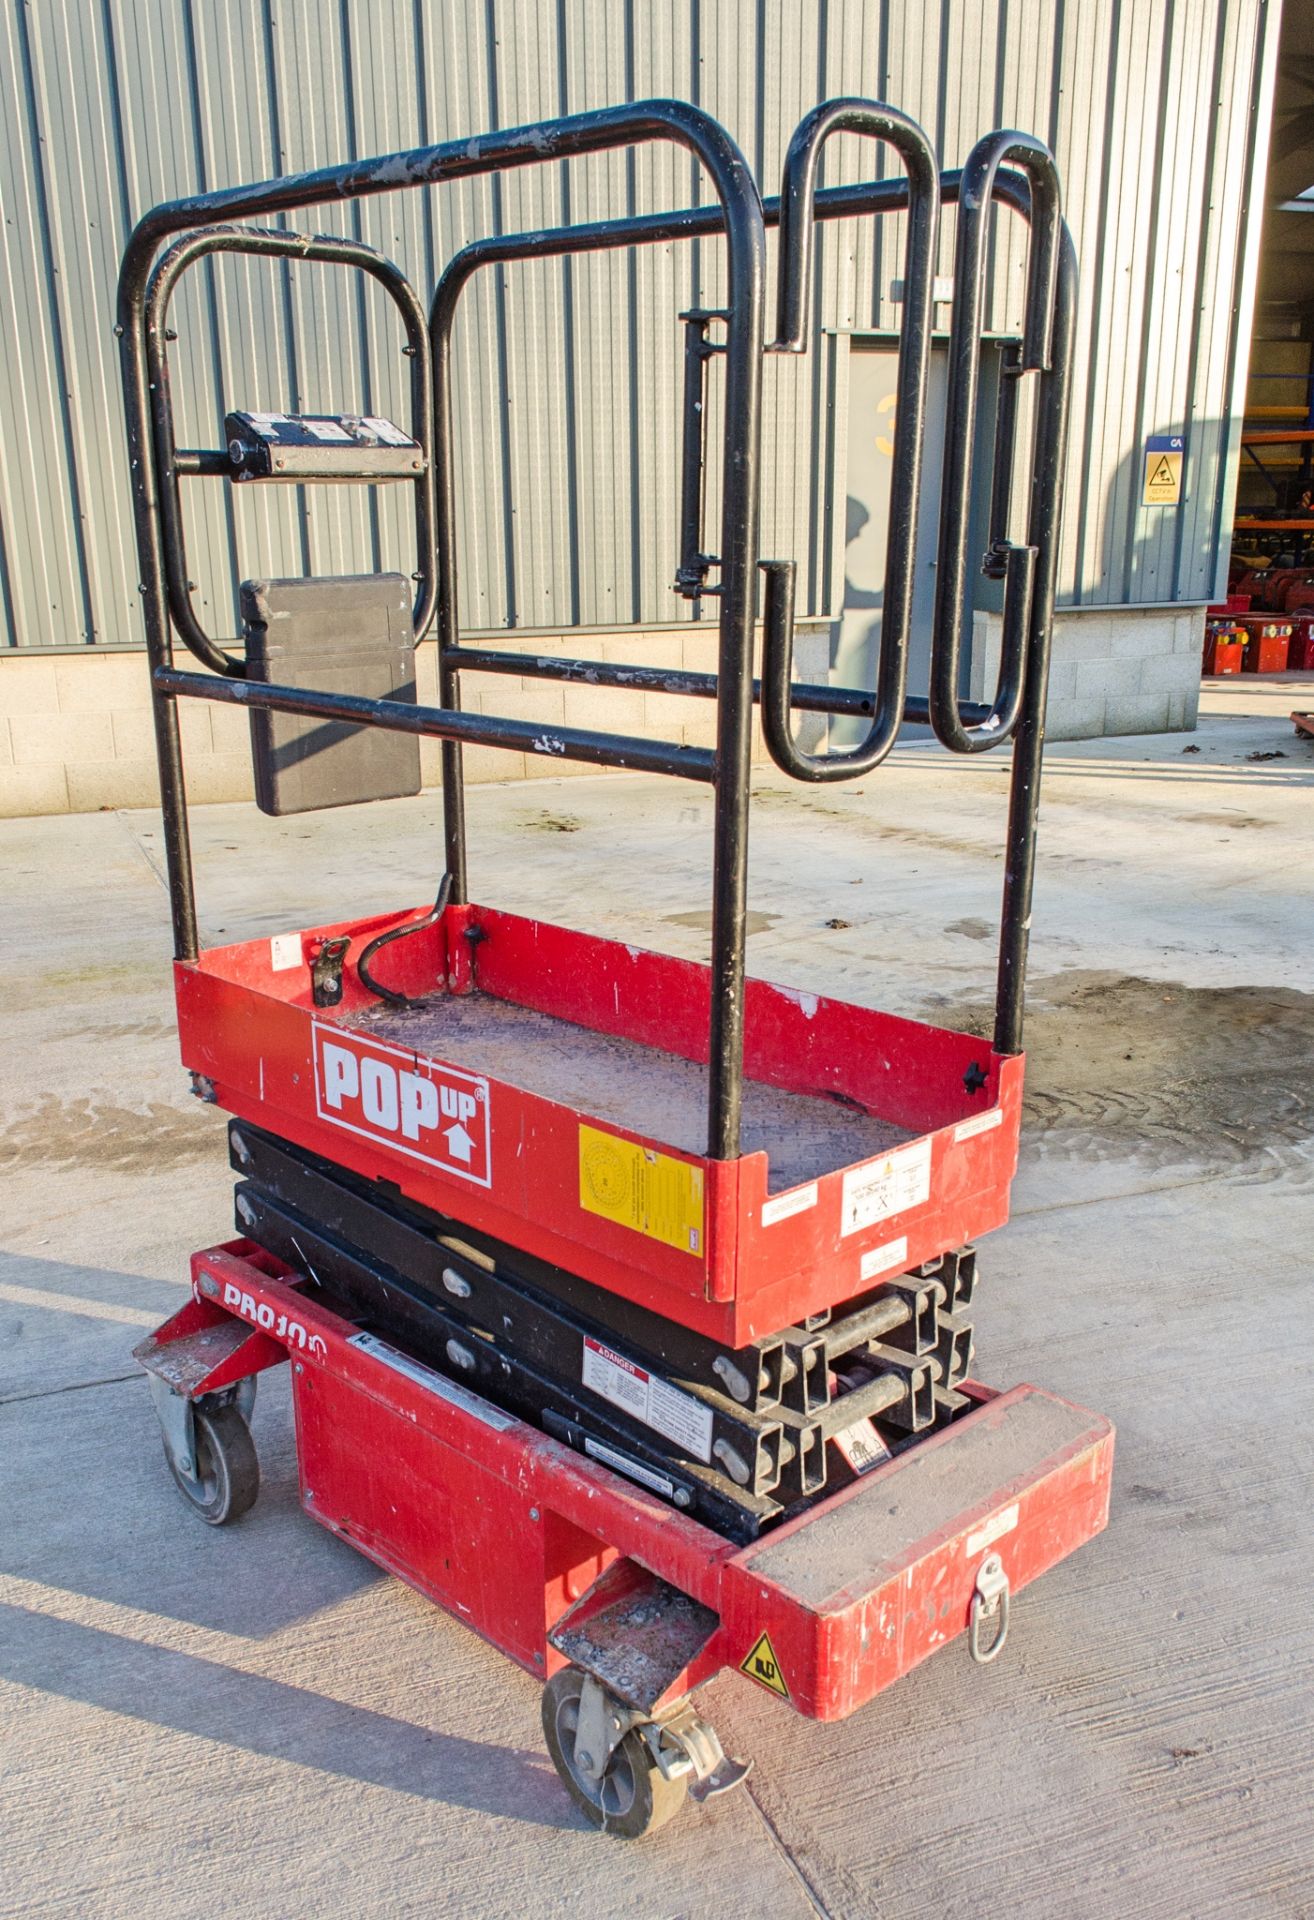 Pop Up Pro 10 battery electric push around scissor lift A740394 - Image 2 of 4